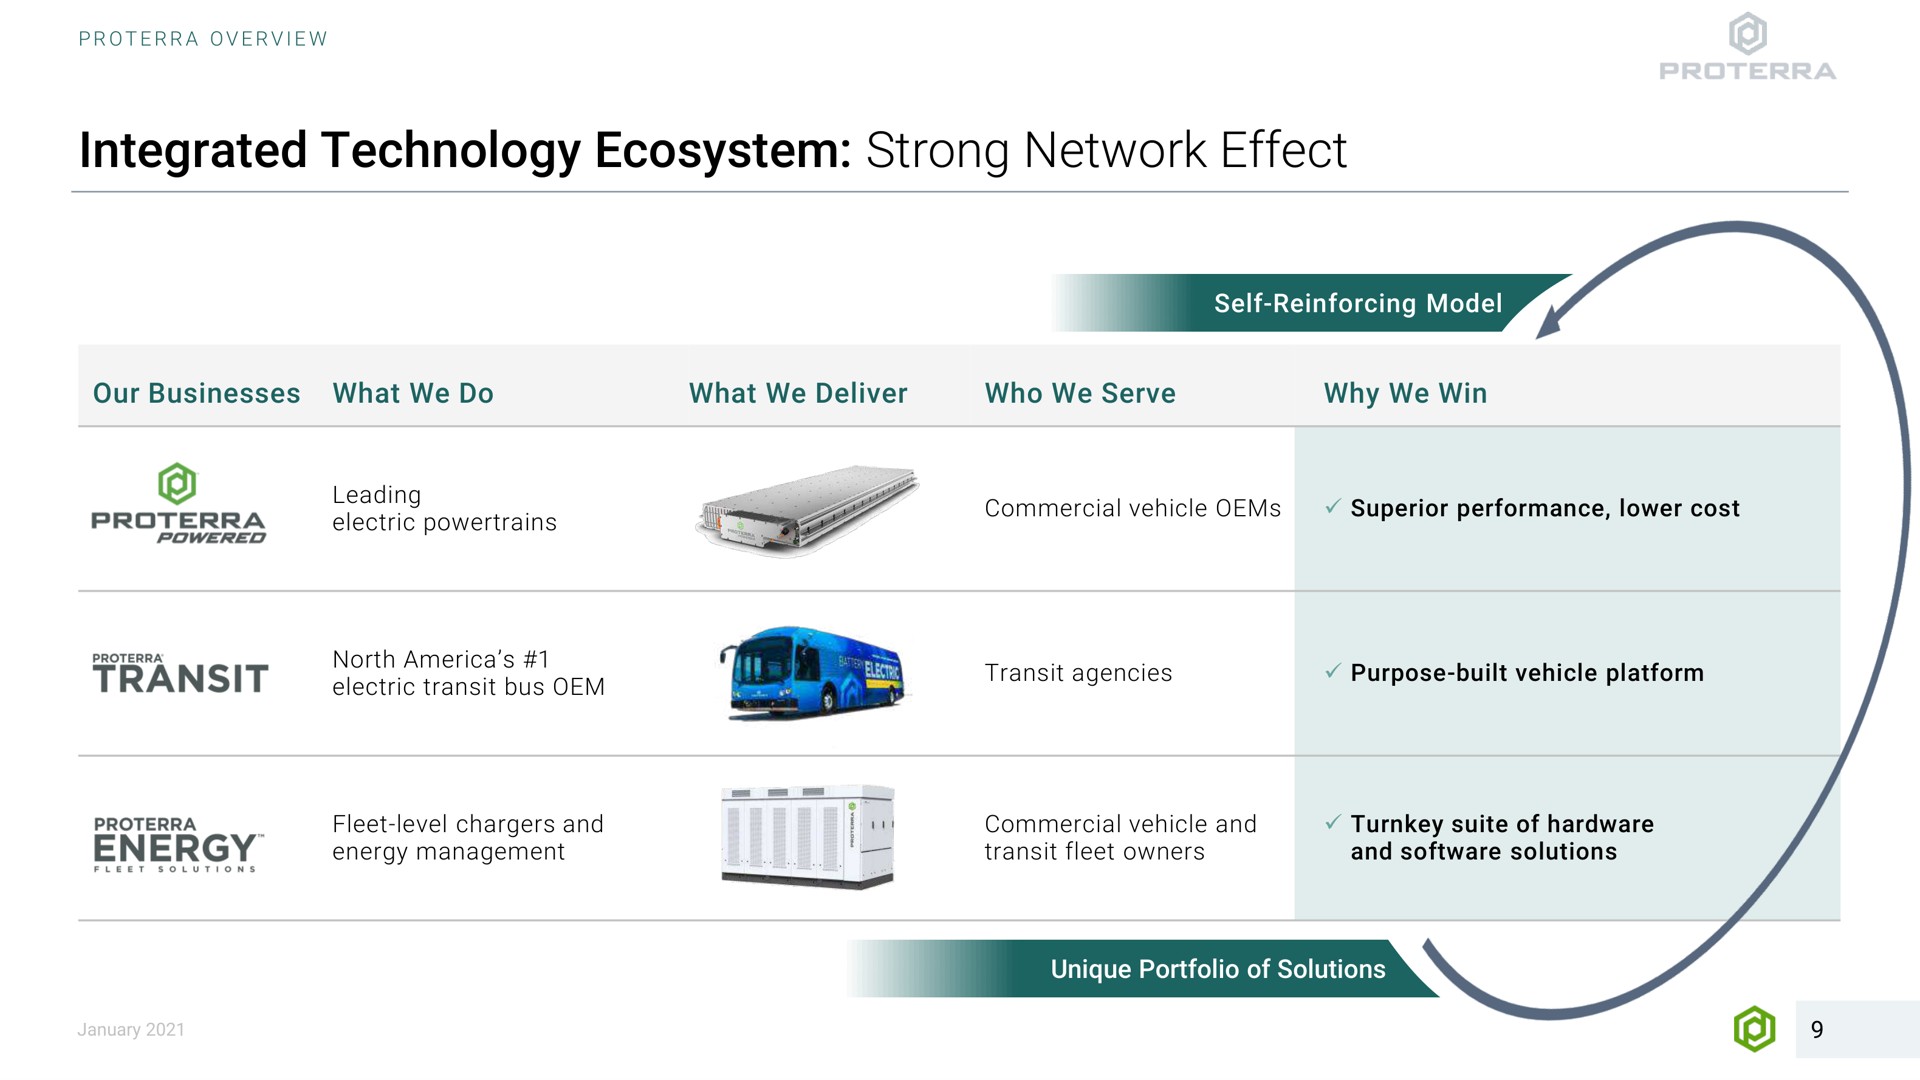 integrated technology ecosystem strong network effect our businesses what we do what we deliver who we serve why we win self reinforcing model leading electric commercial vehicle superior performance lower cost transit north electric transit bus transit agencies purpose built vehicle platform fleet level chargers and energy management a i commercial vehicle and transit fleet owners turnkey suite of hardware and solutions unique portfolio of solutions | Proterra